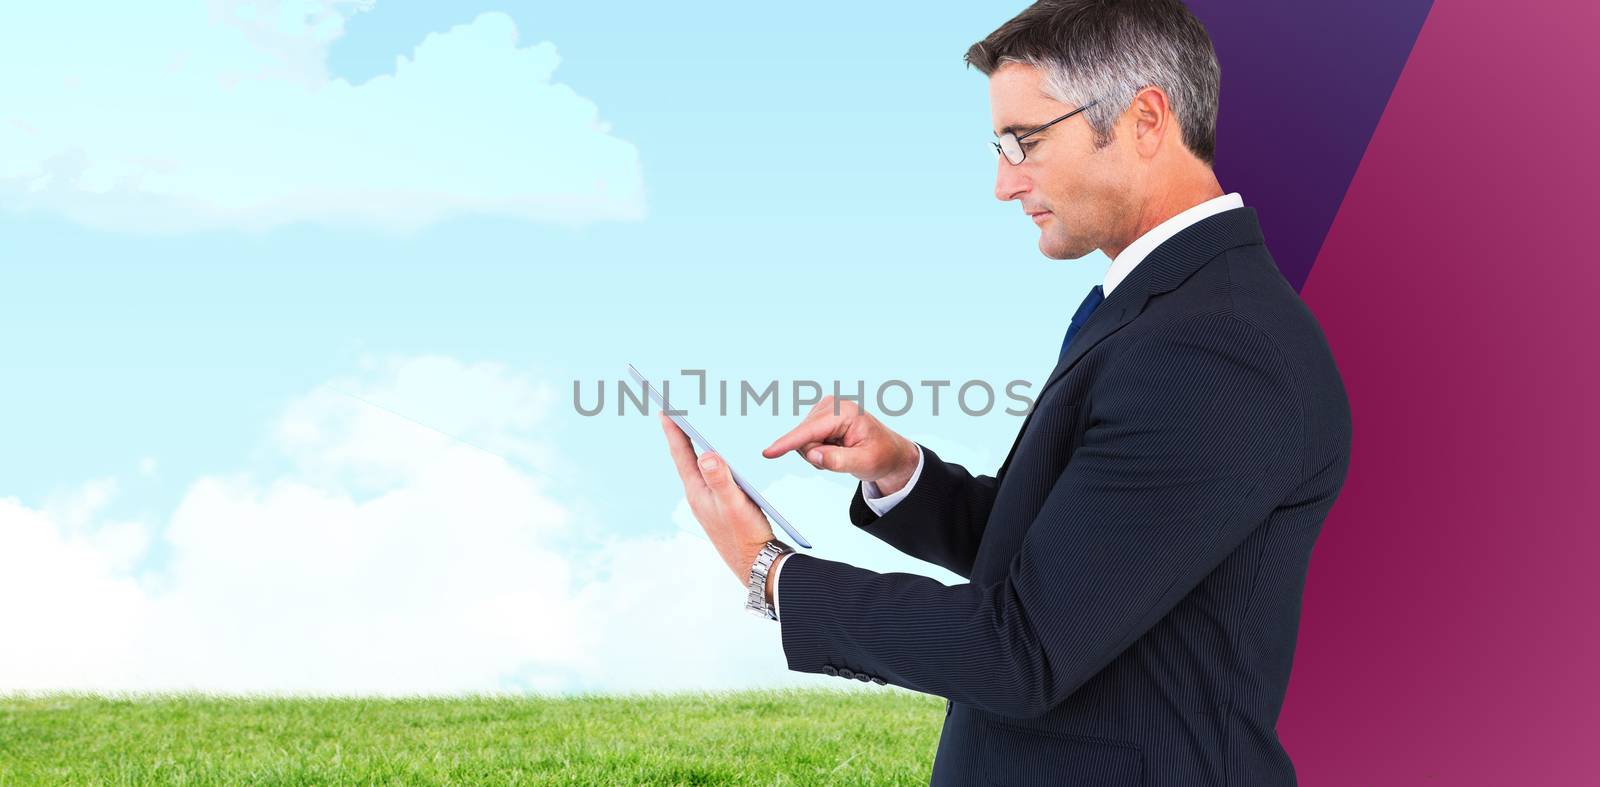 Mid section of a businessman touching tablet against grassy field against sky